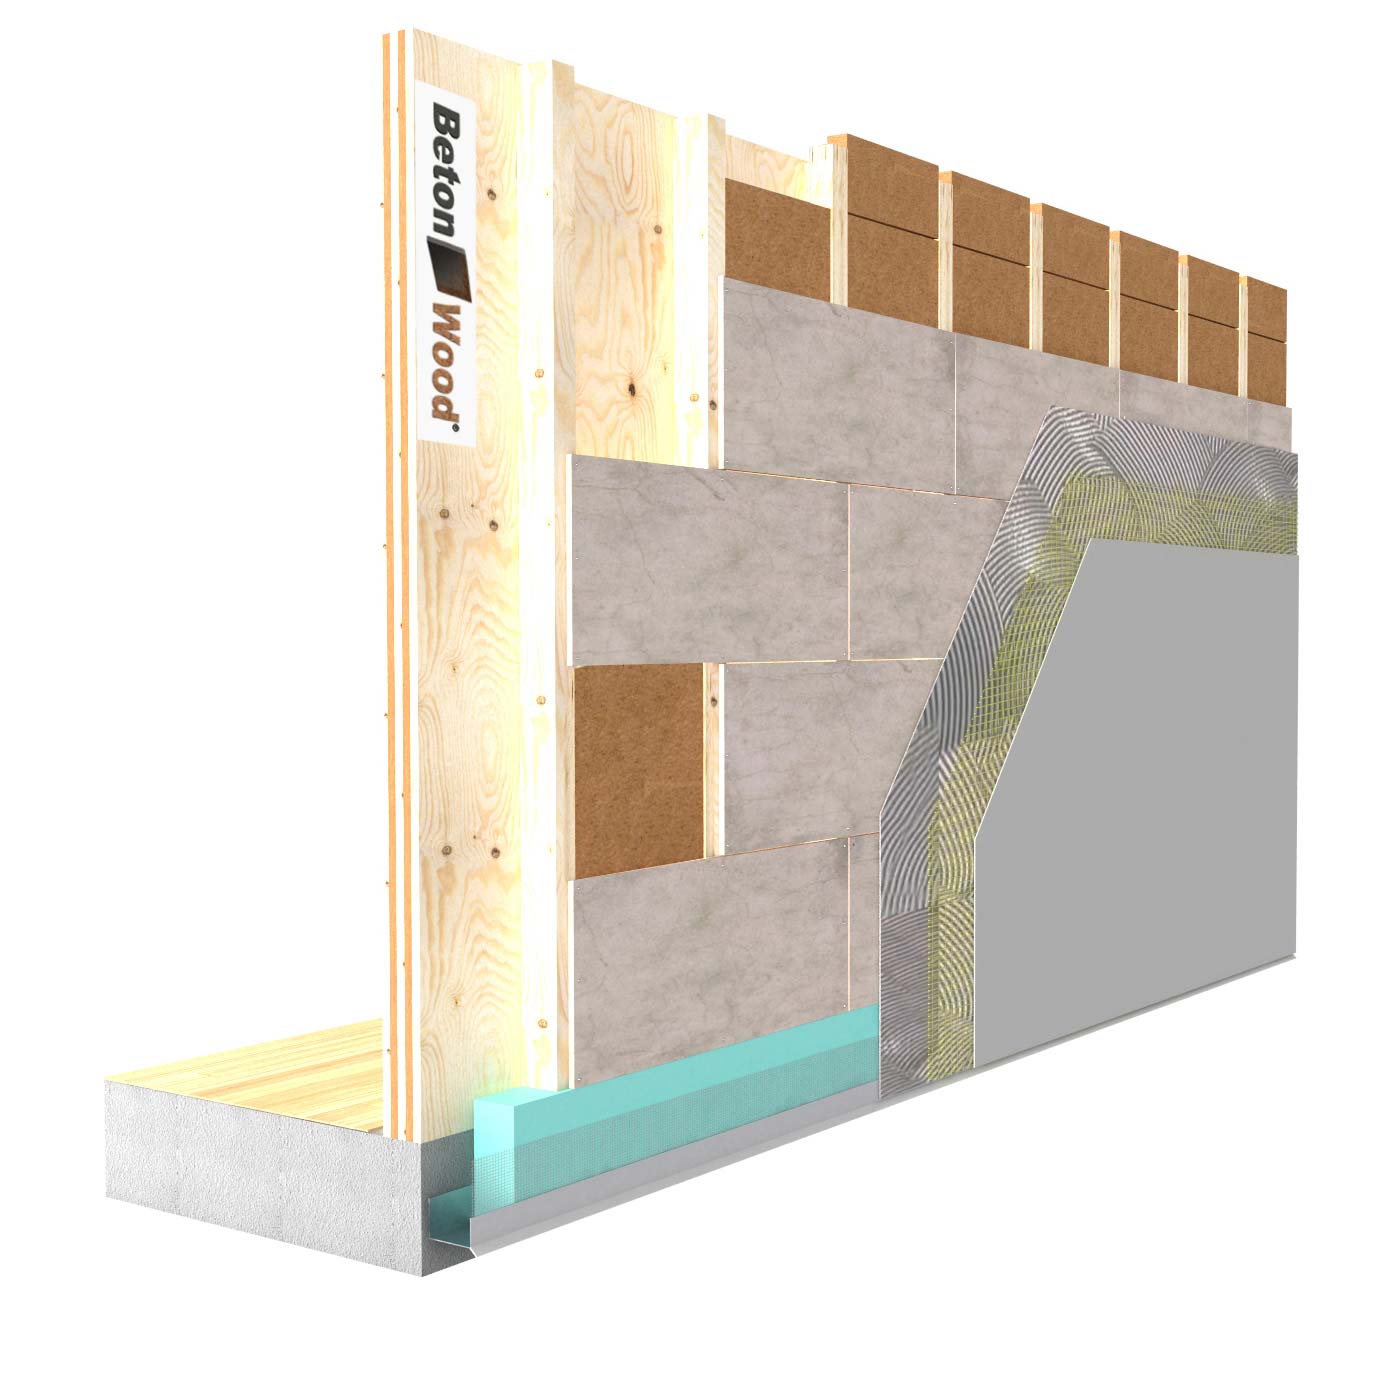 External insulation system with Protect dry wood fiber on wooden walls